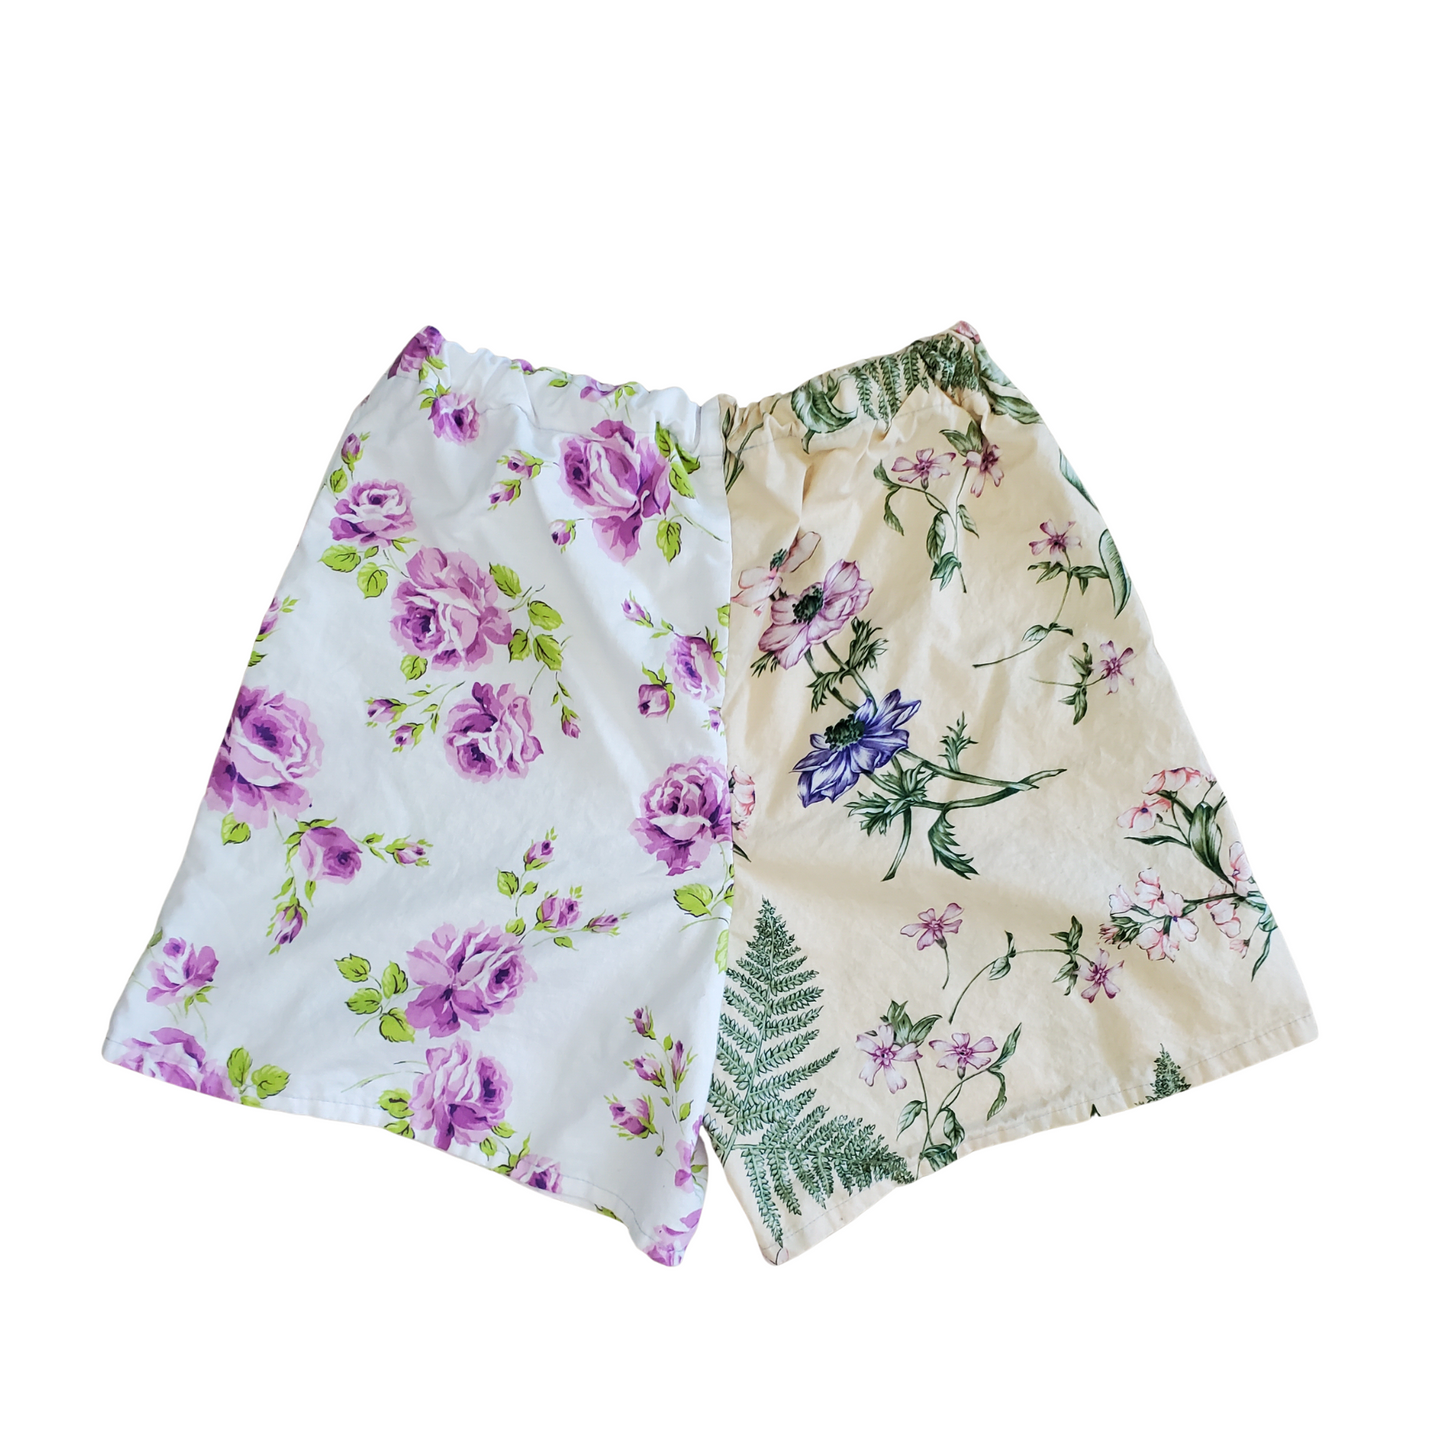 Floral Patchwork Upcycled Cotton Shorts Size M